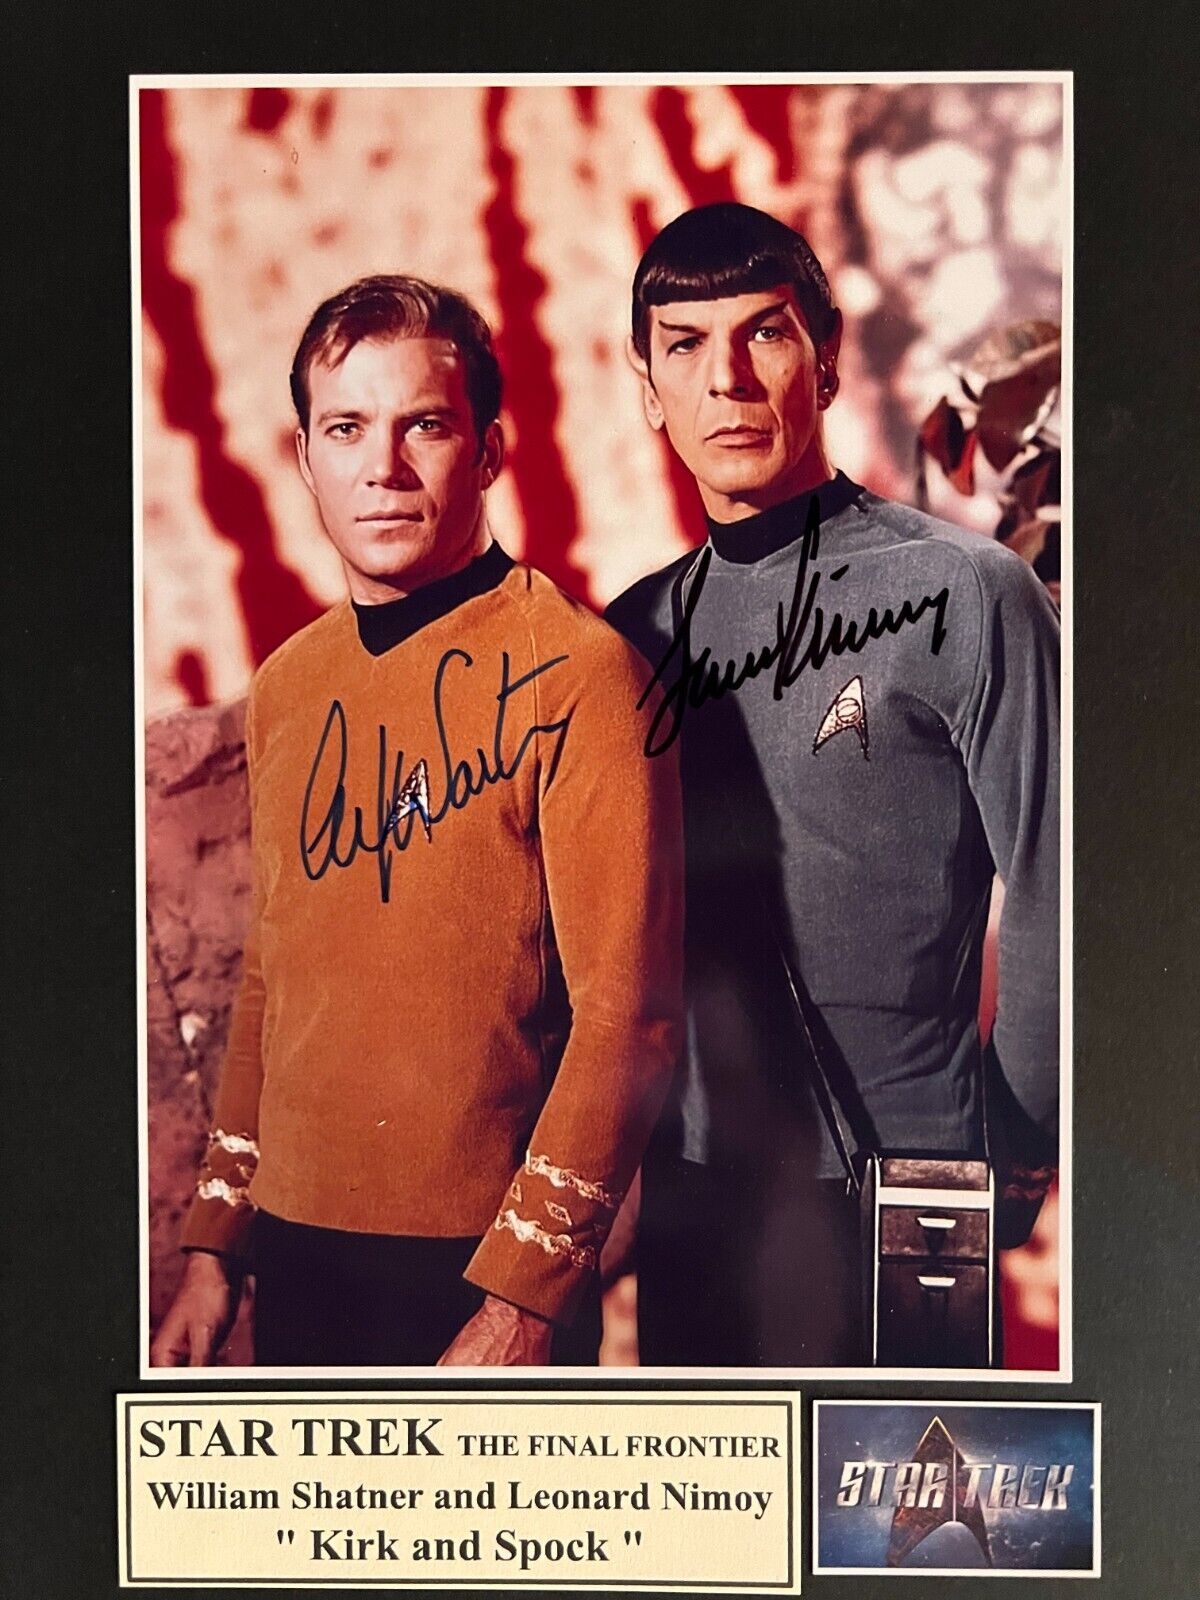 Star Trek cast signed photo autographed by William Shatner and Leonard Nimoy